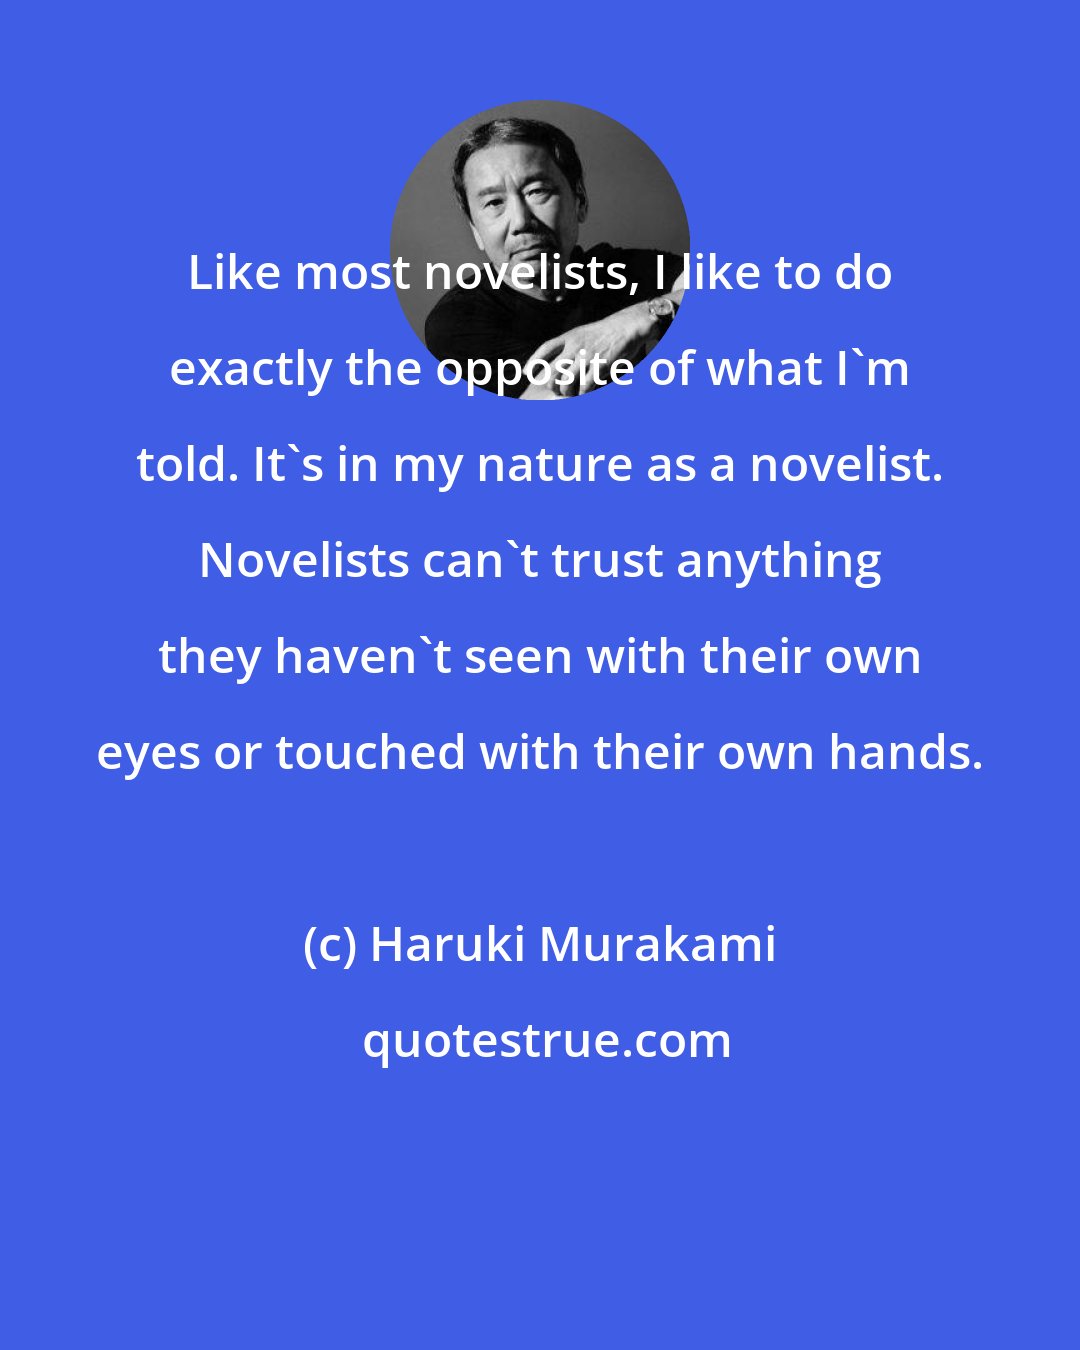 Haruki Murakami: Like most novelists, I like to do exactly the opposite of what I'm told. It's in my nature as a novelist. Novelists can't trust anything they haven't seen with their own eyes or touched with their own hands.